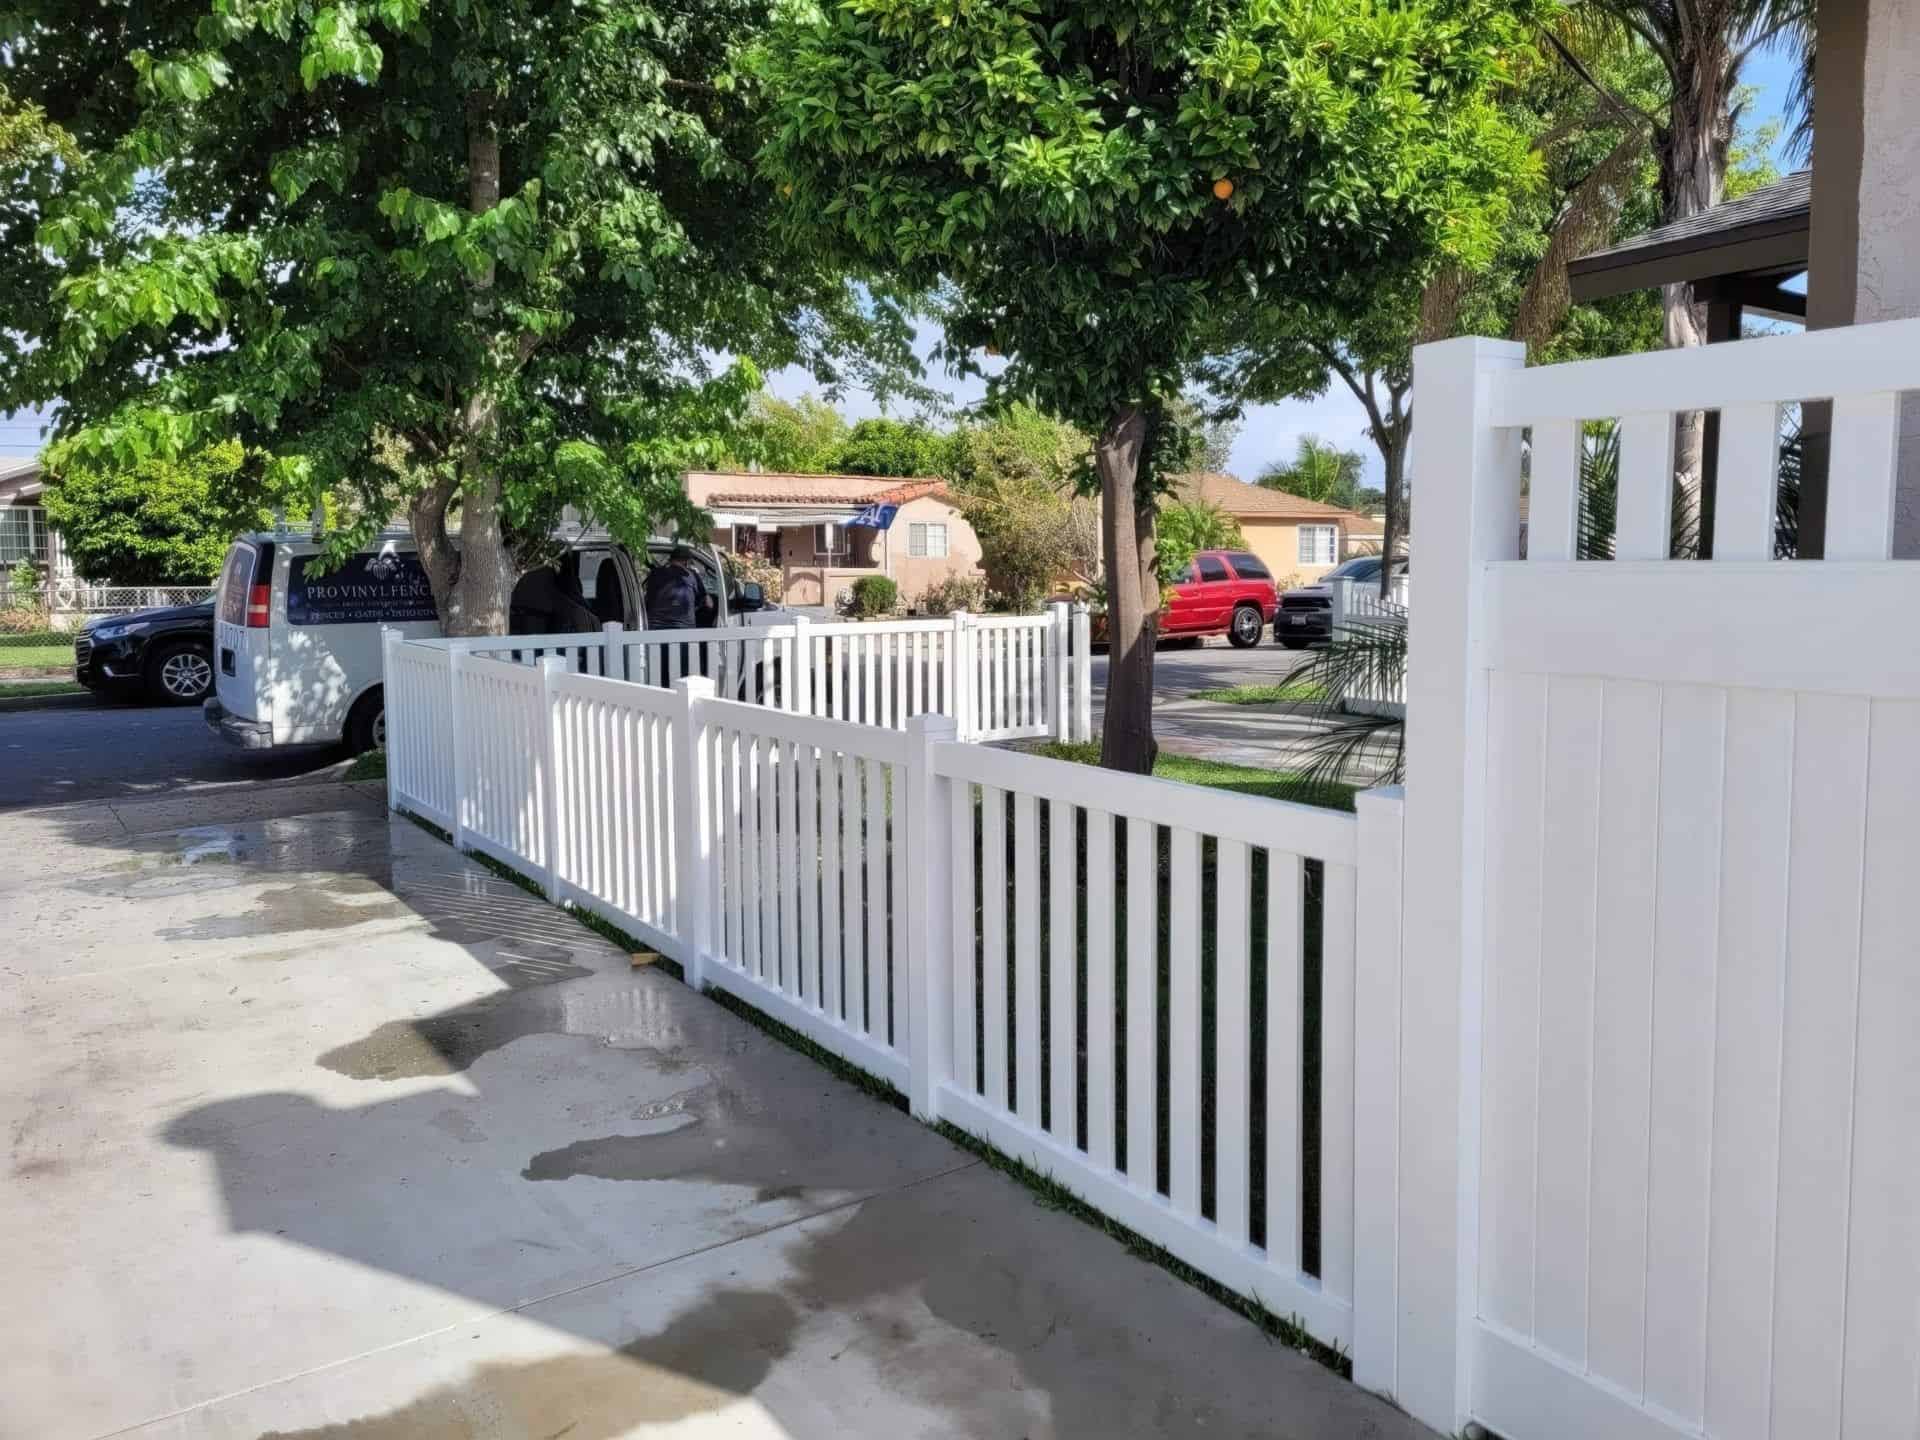 Vinyl picket fence with gate leading into side entrance of home under wooden shade